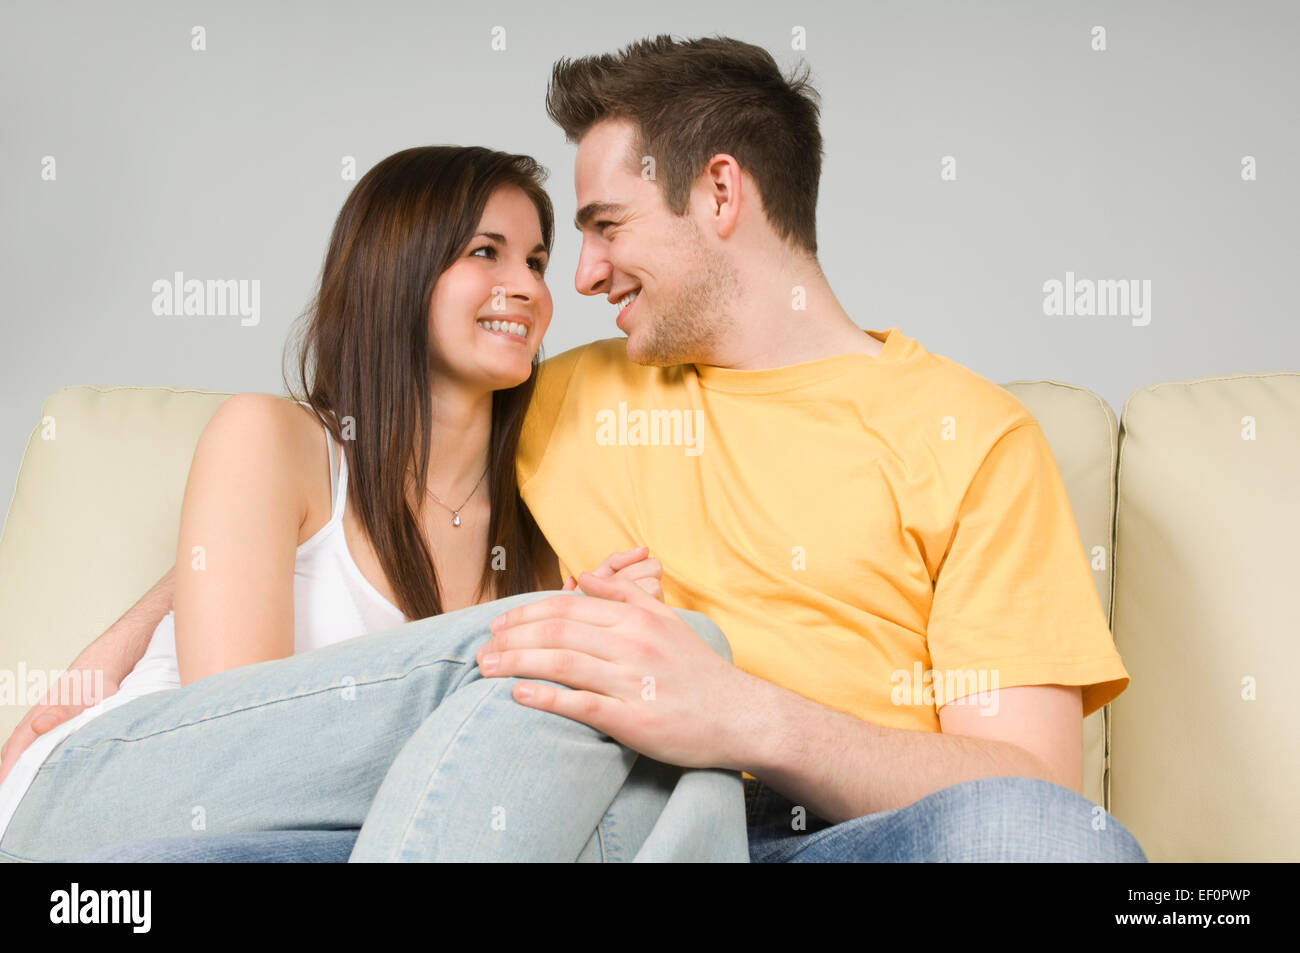 Couple embracing on couch Stock Photo